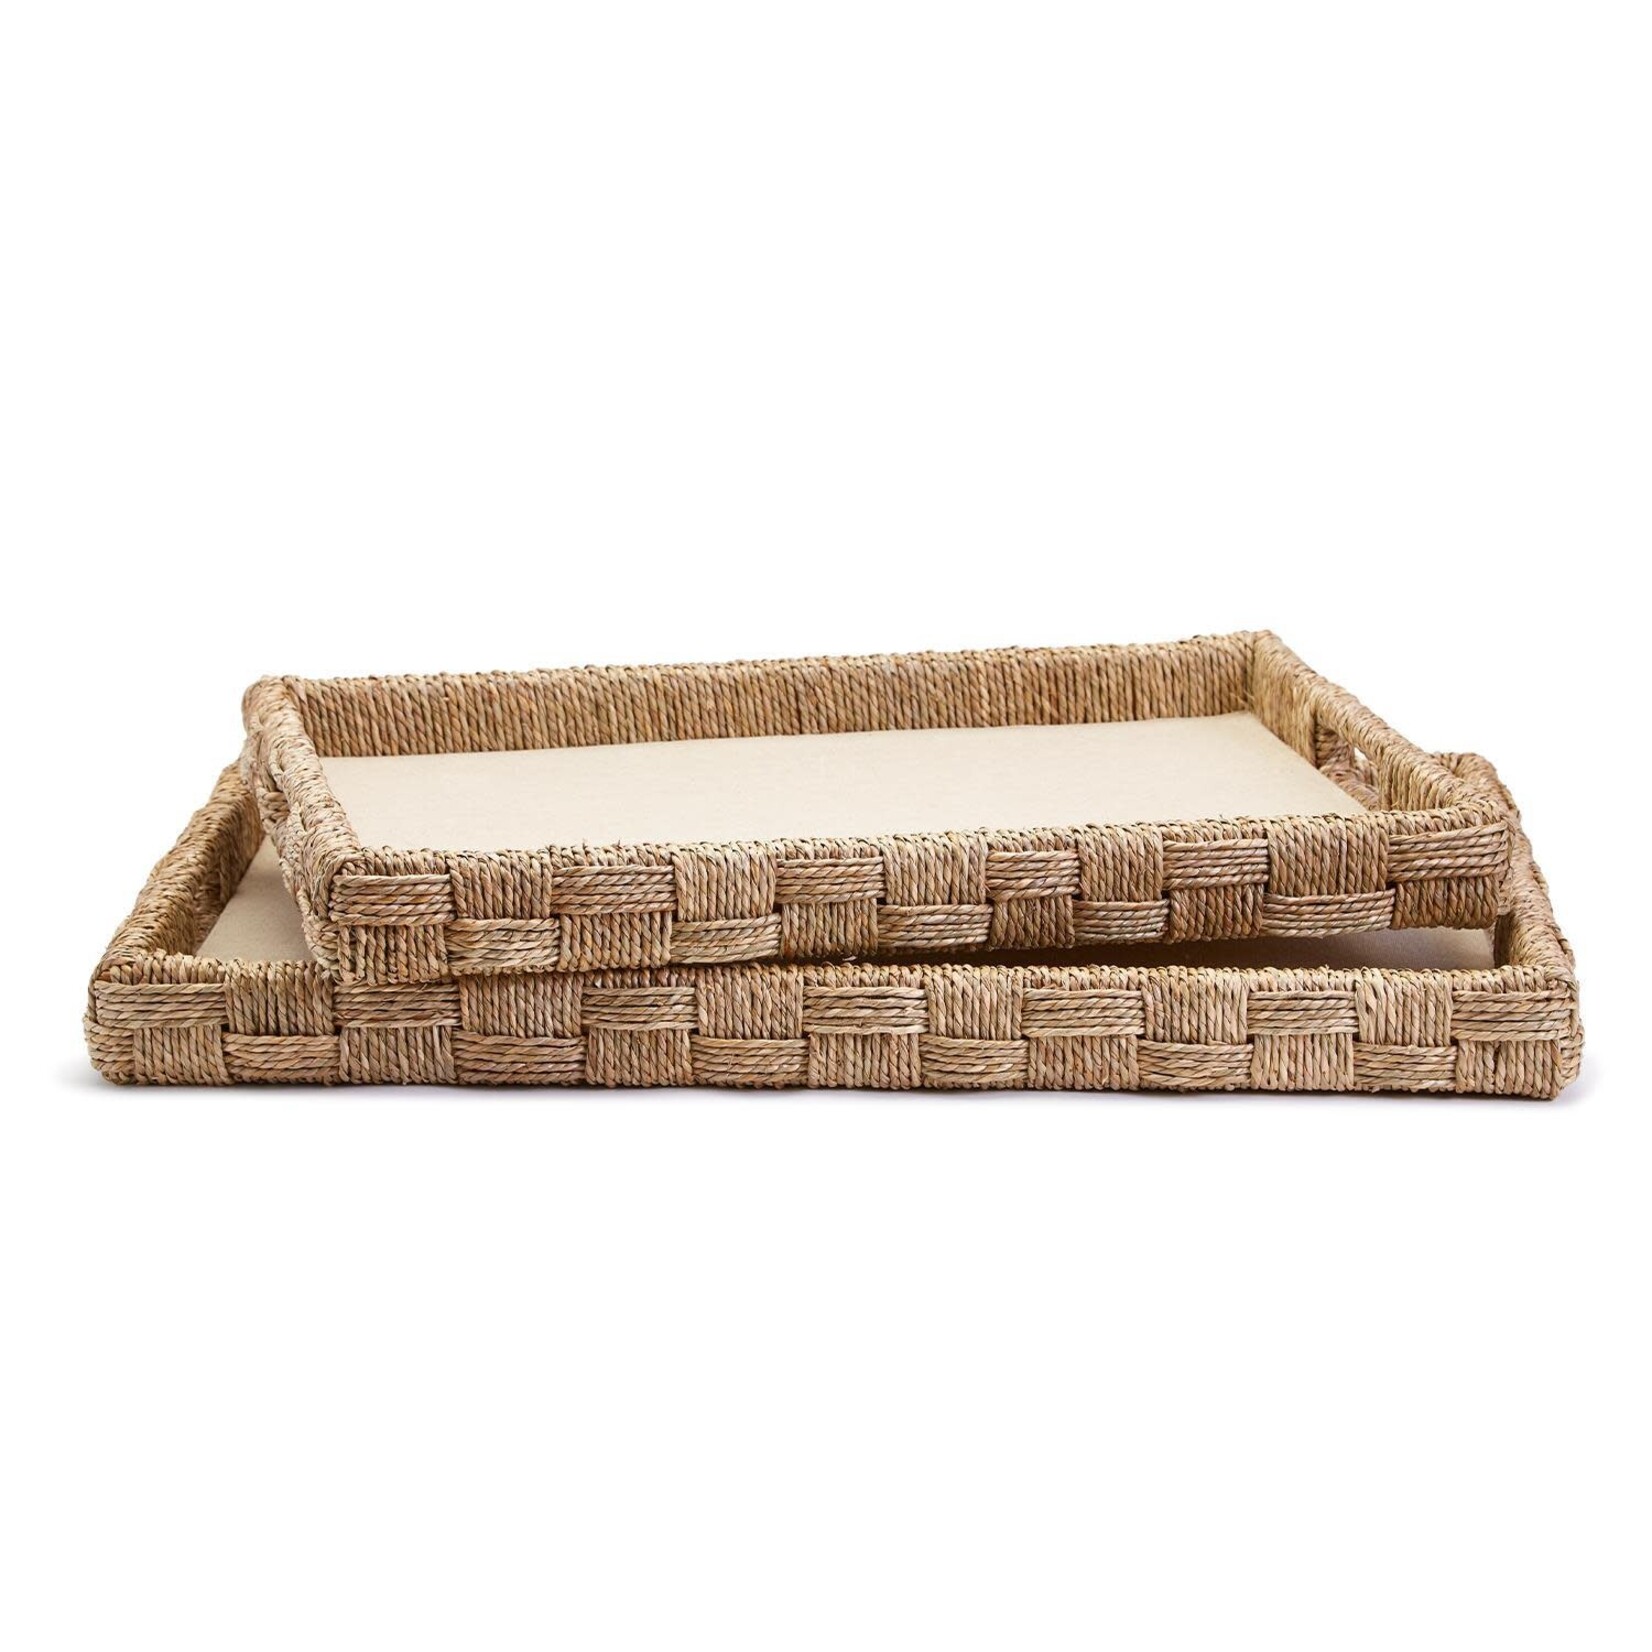 Outside The Box 20x13 Natural Hand-Crafted Sea Grass & Rattan Square Tray